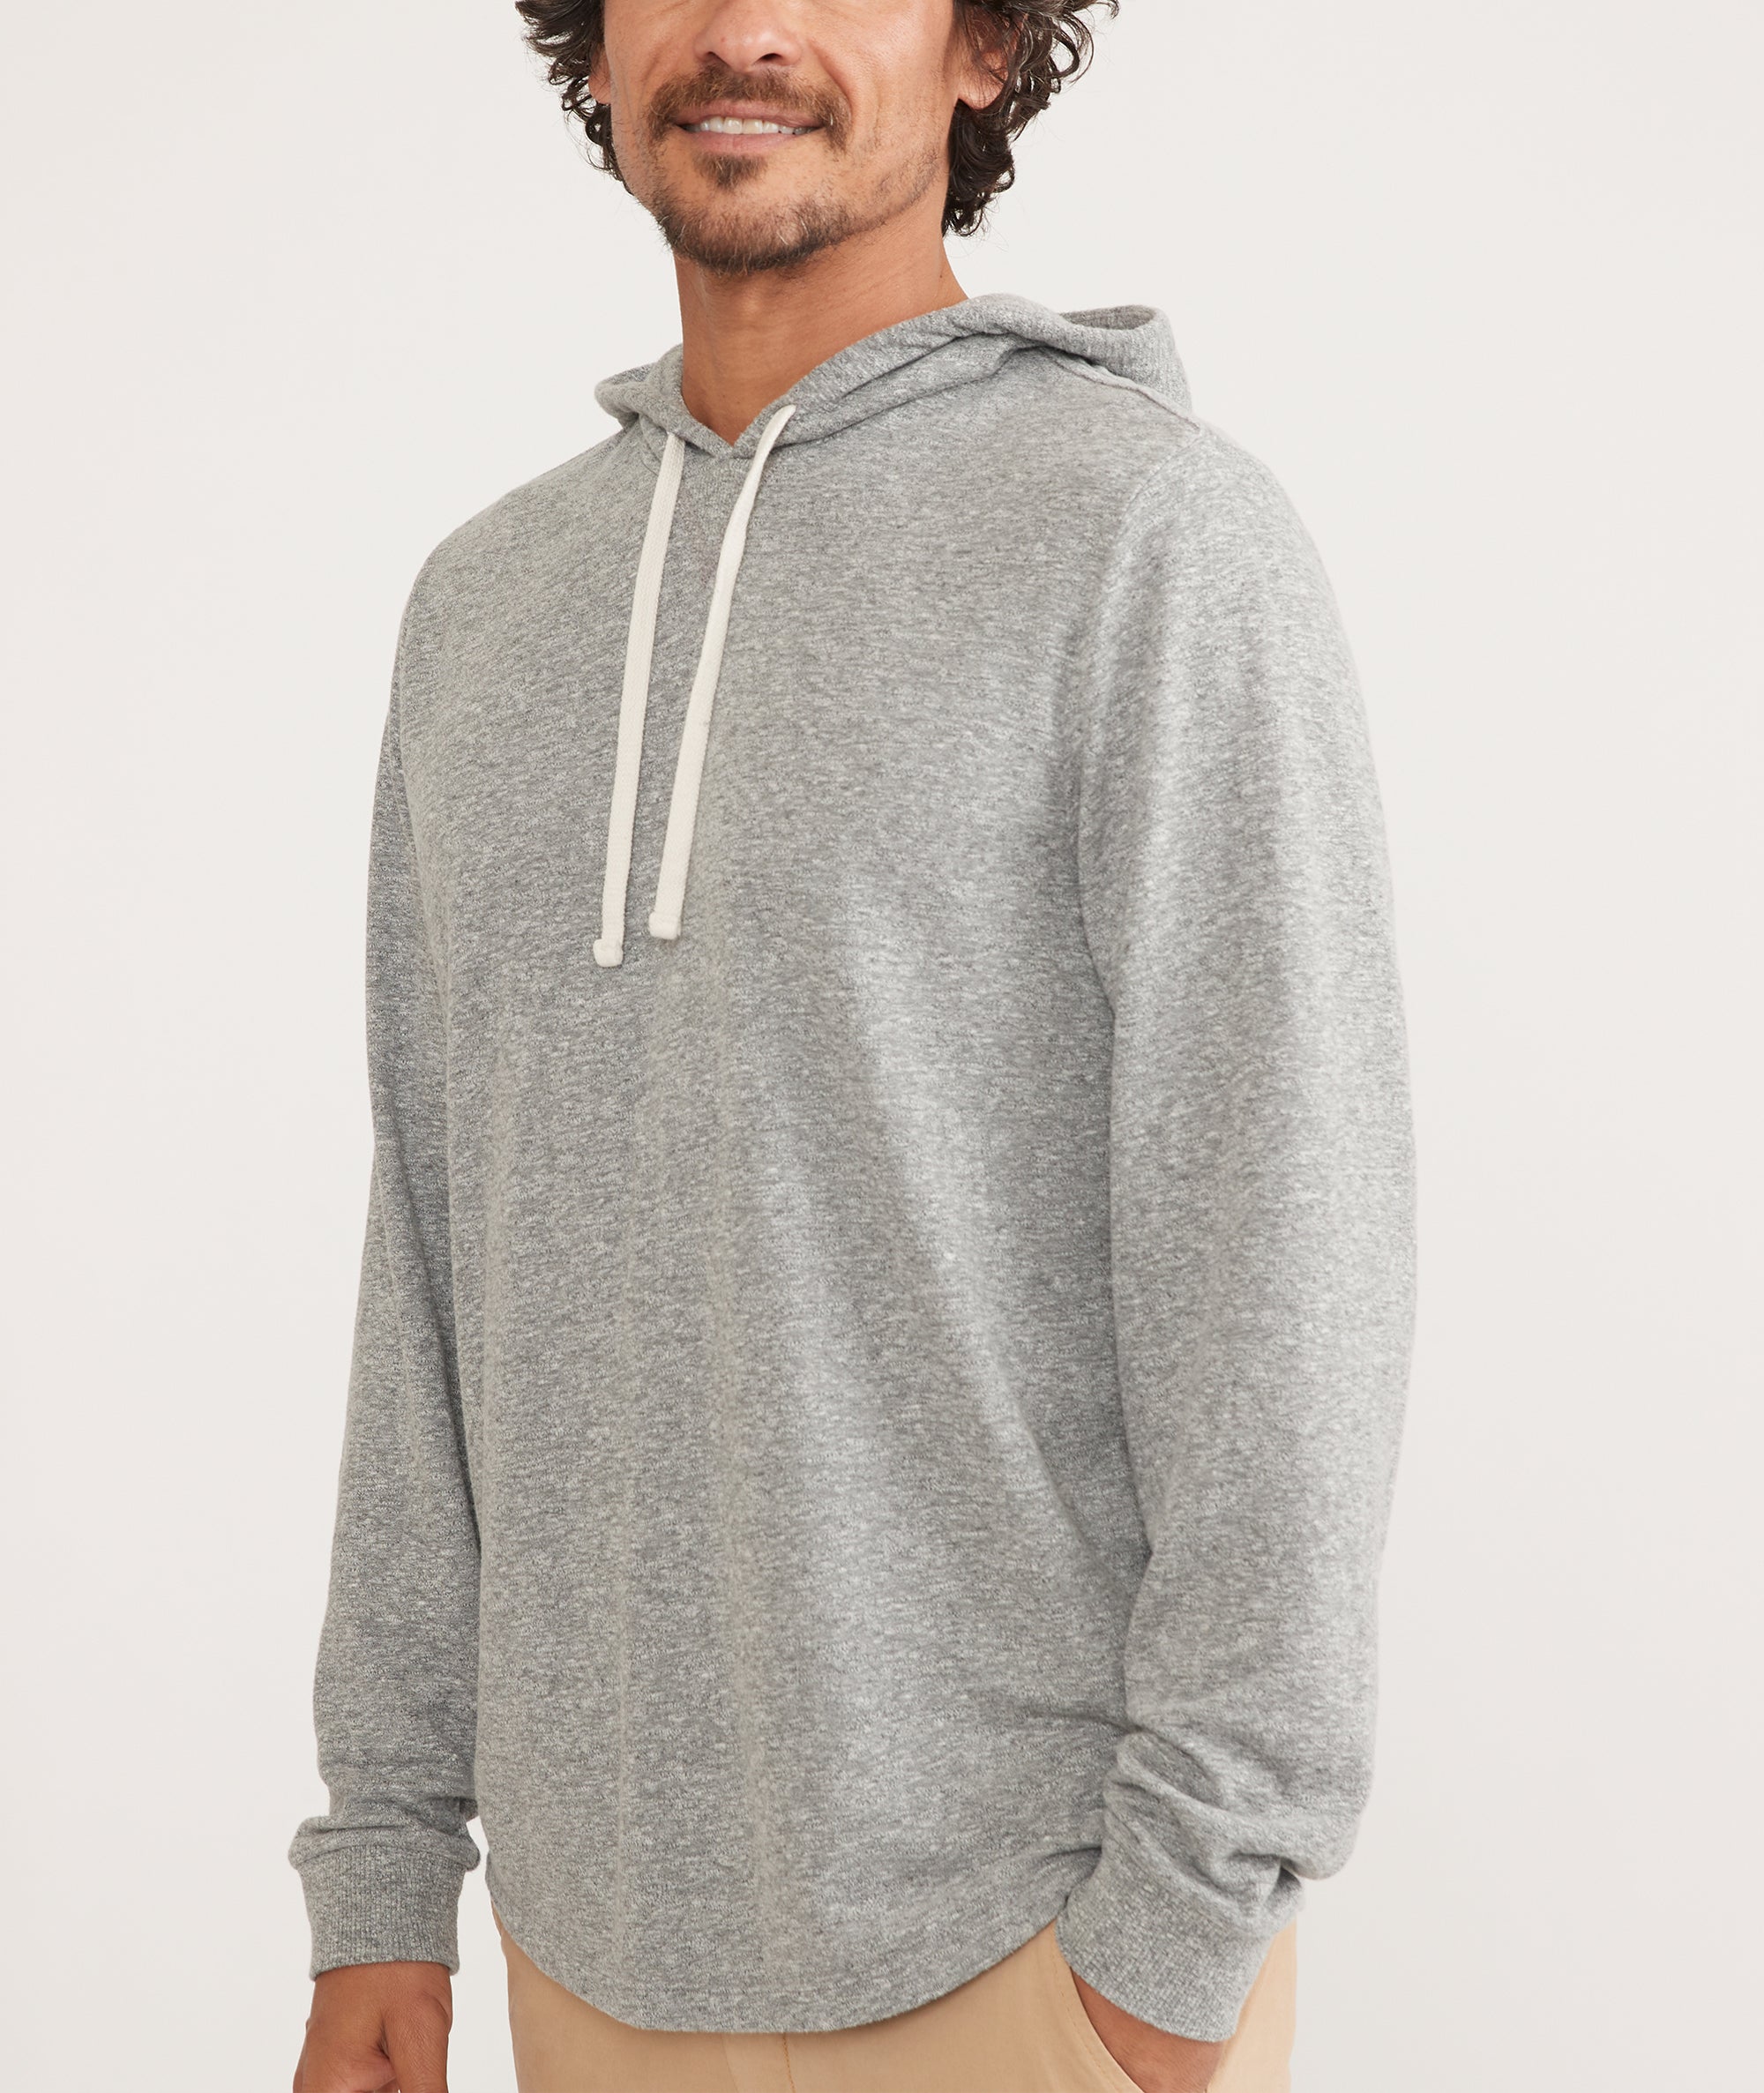 Double Knit Hoodie – Marine Layer